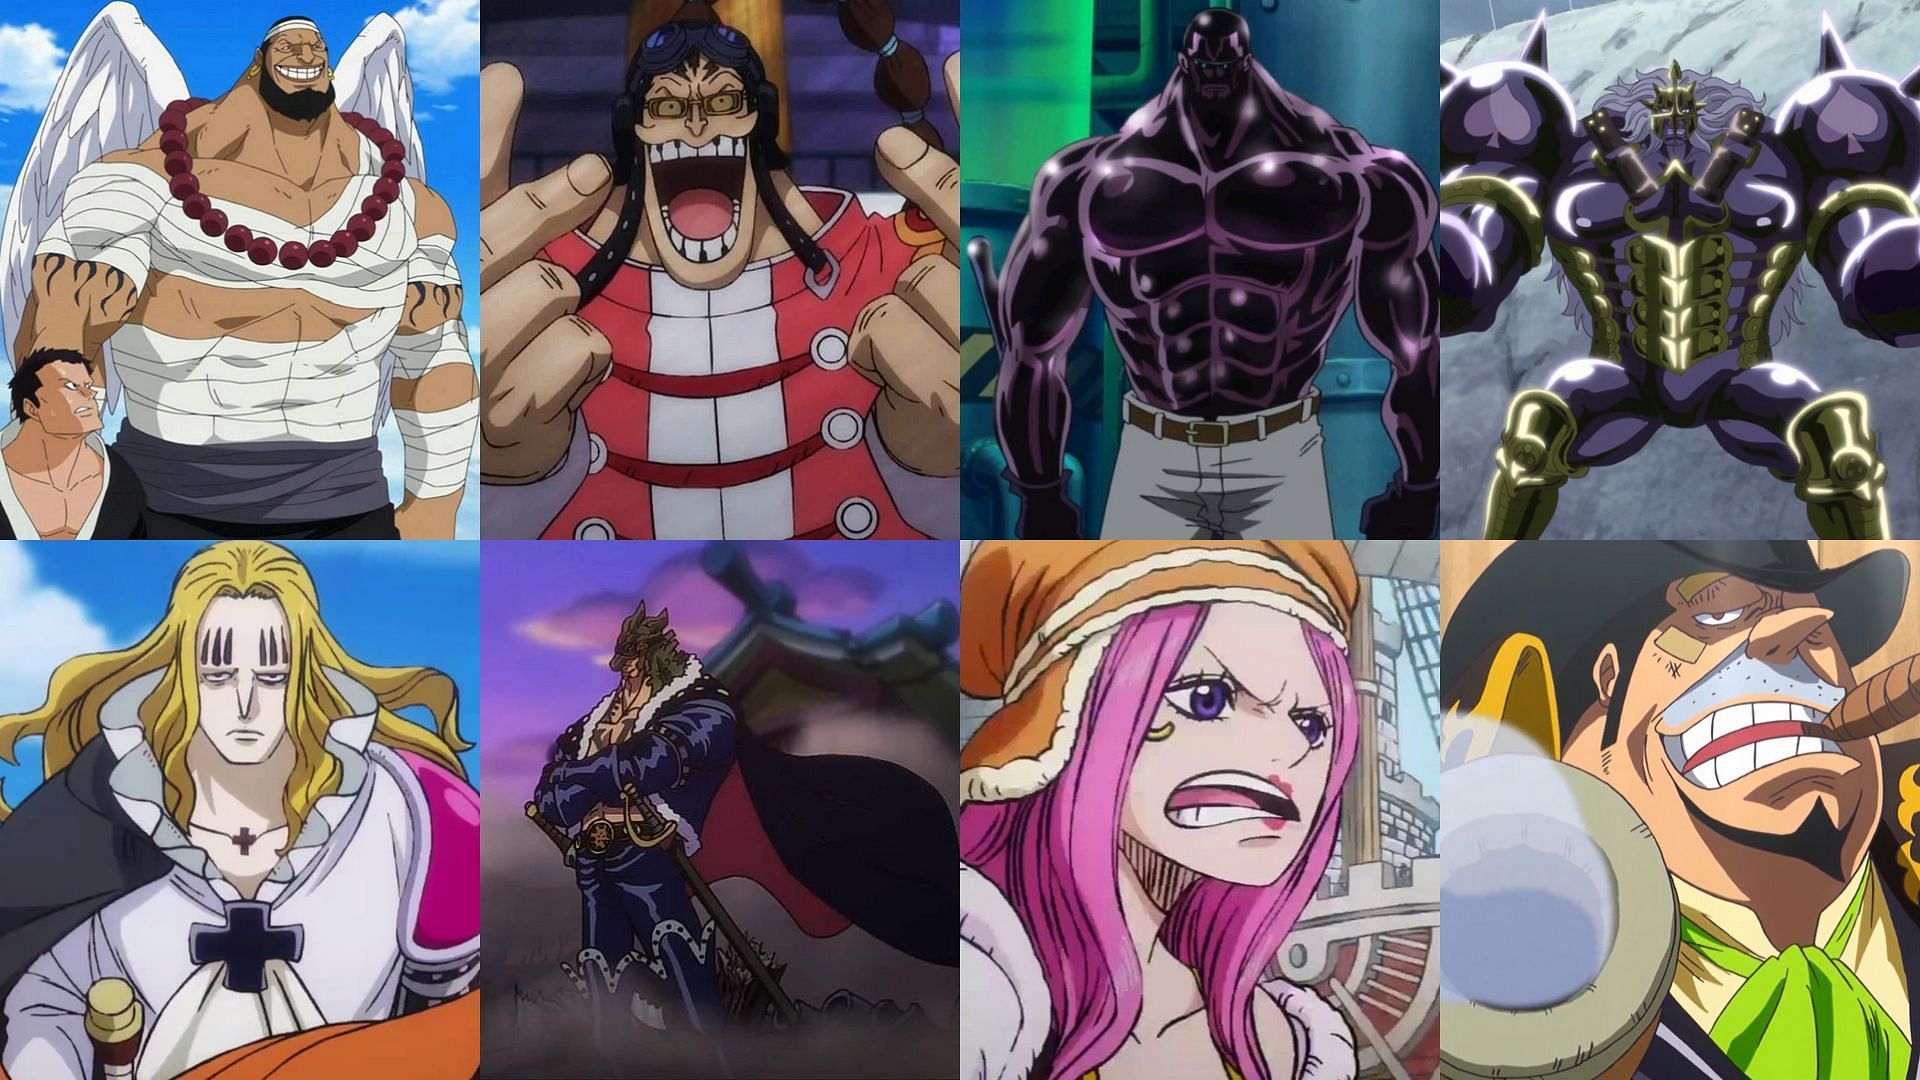 Pica, Vergo, Apoo, Urouge, Hawkins, Drake, Bonney and Capone (Image via Toei Animation, One Piece)